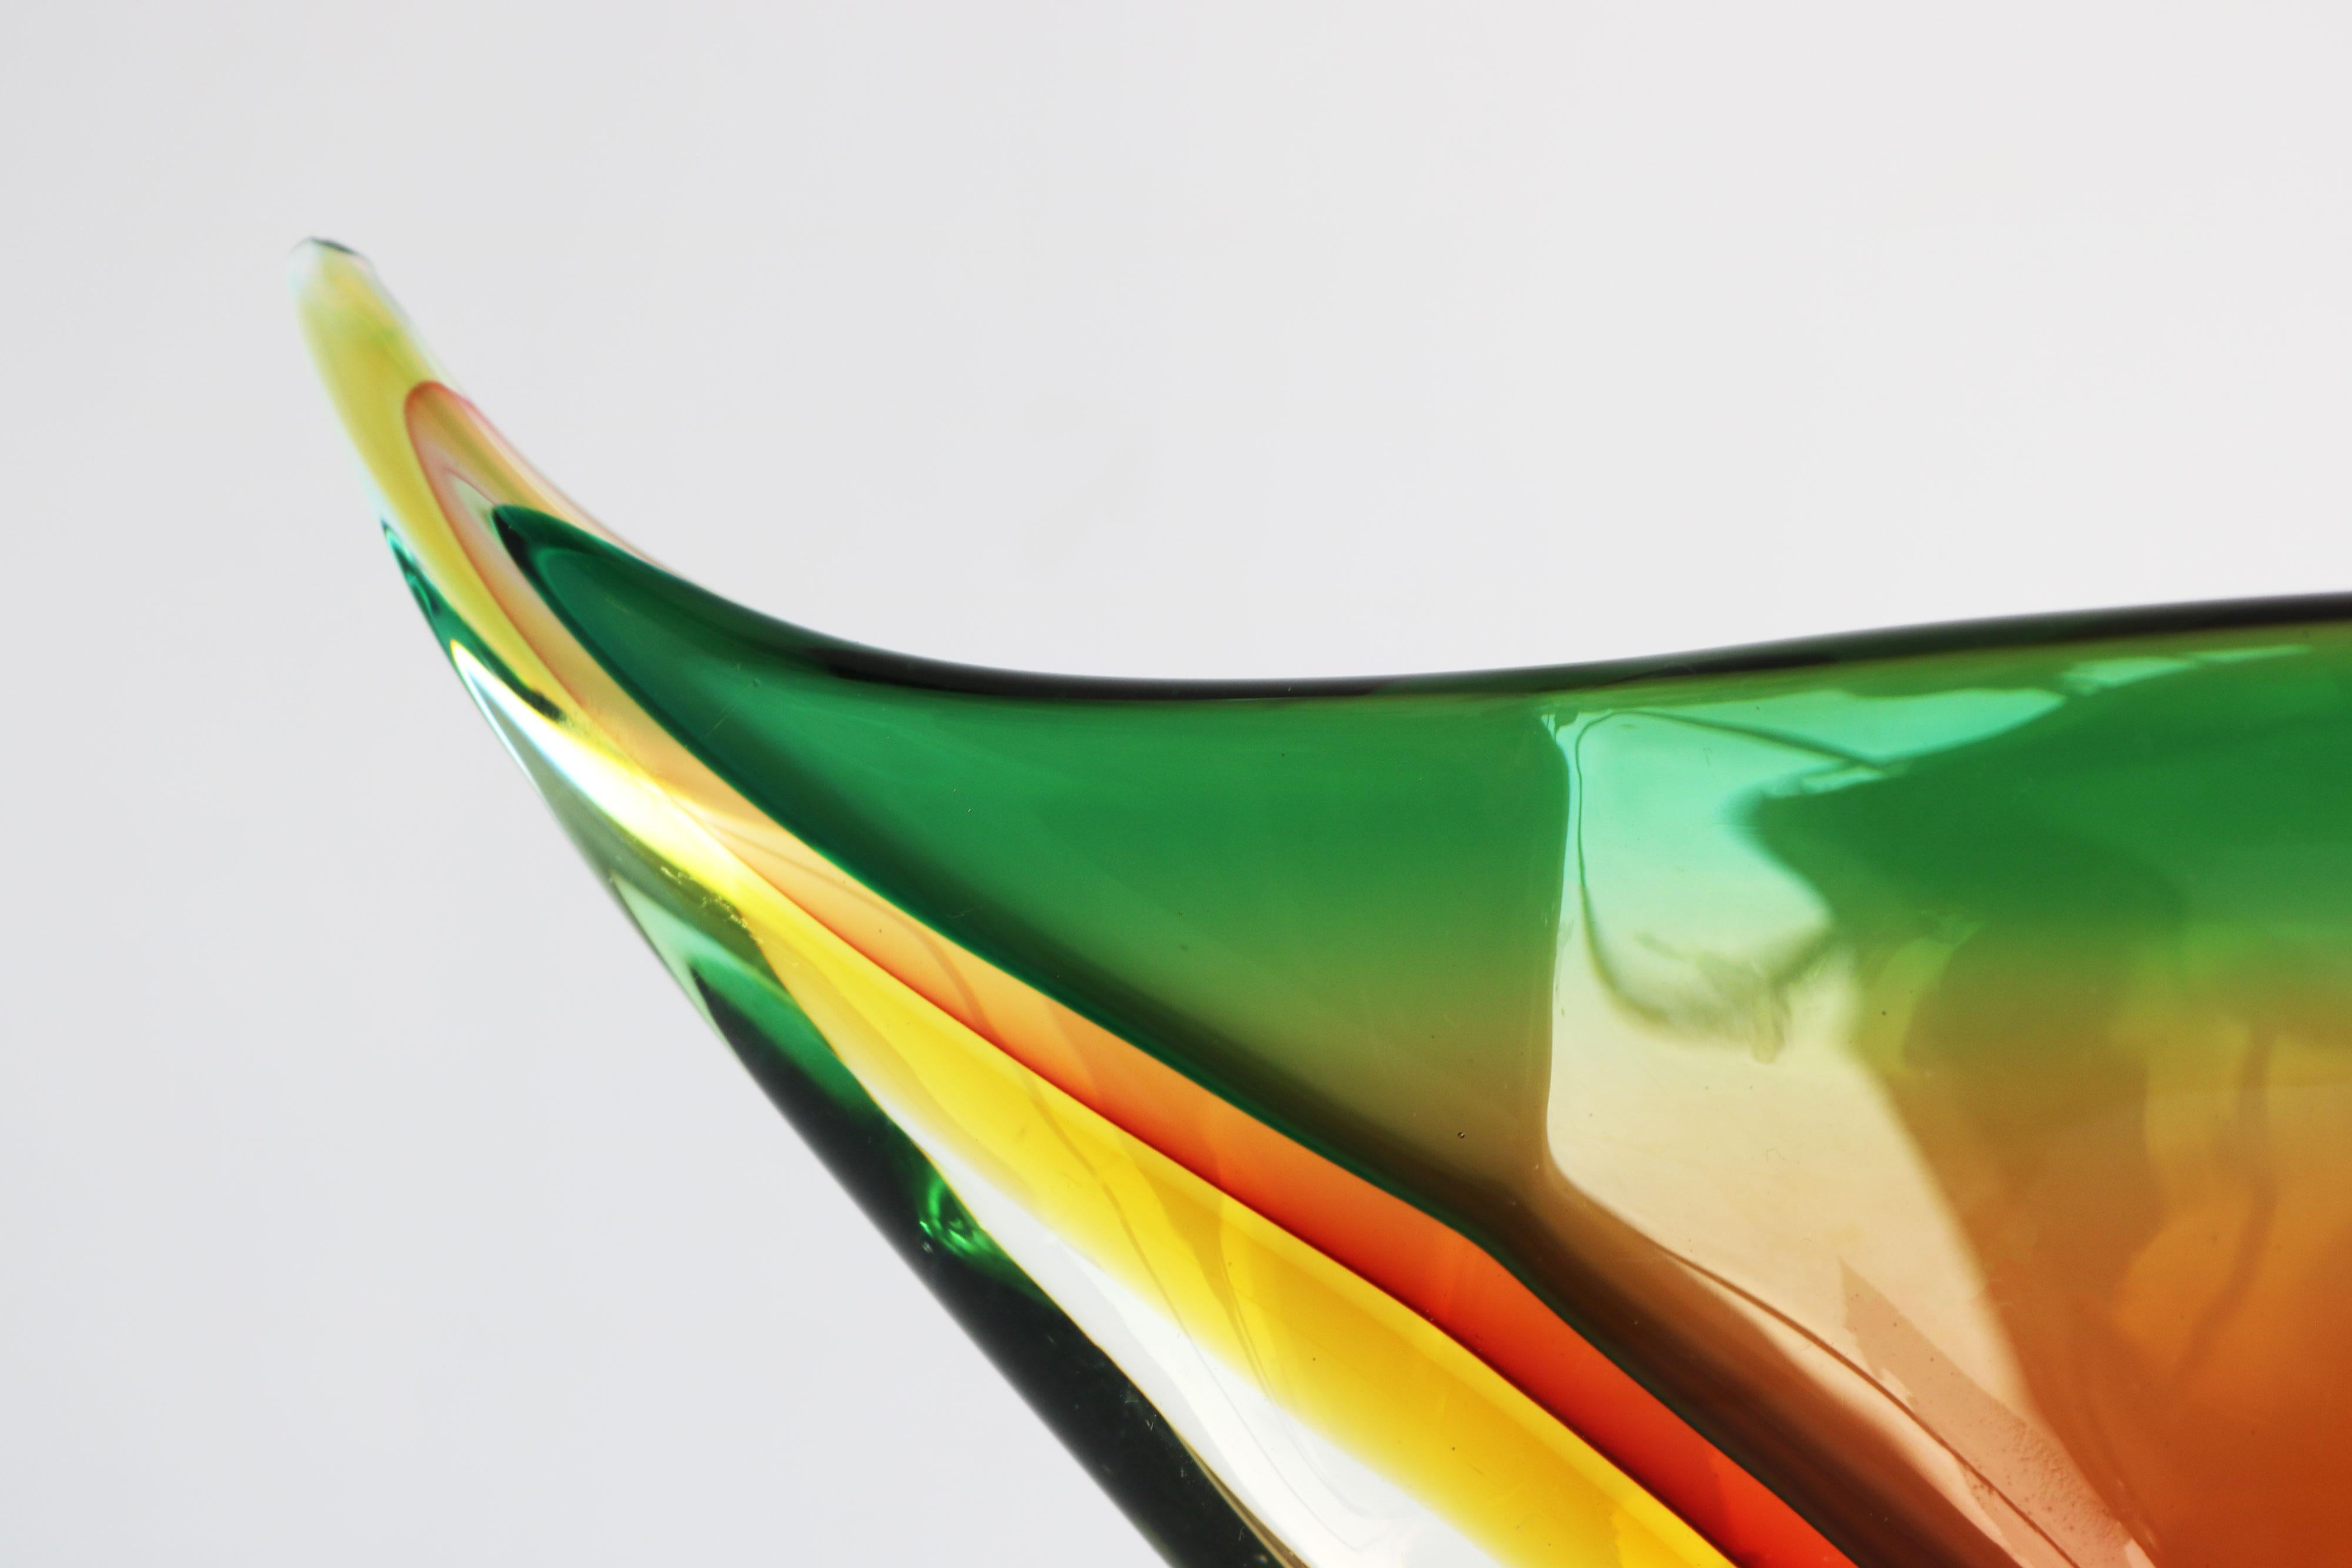 Gorgeous & Timeless! This freefrom vase by Flavio Poli for Seguso italy 1960. Made fully by hand using the Sommerso technique. Capturing multiple layers of colour between clear glass and then carved out. Very nice piece with 3/4 colours captured